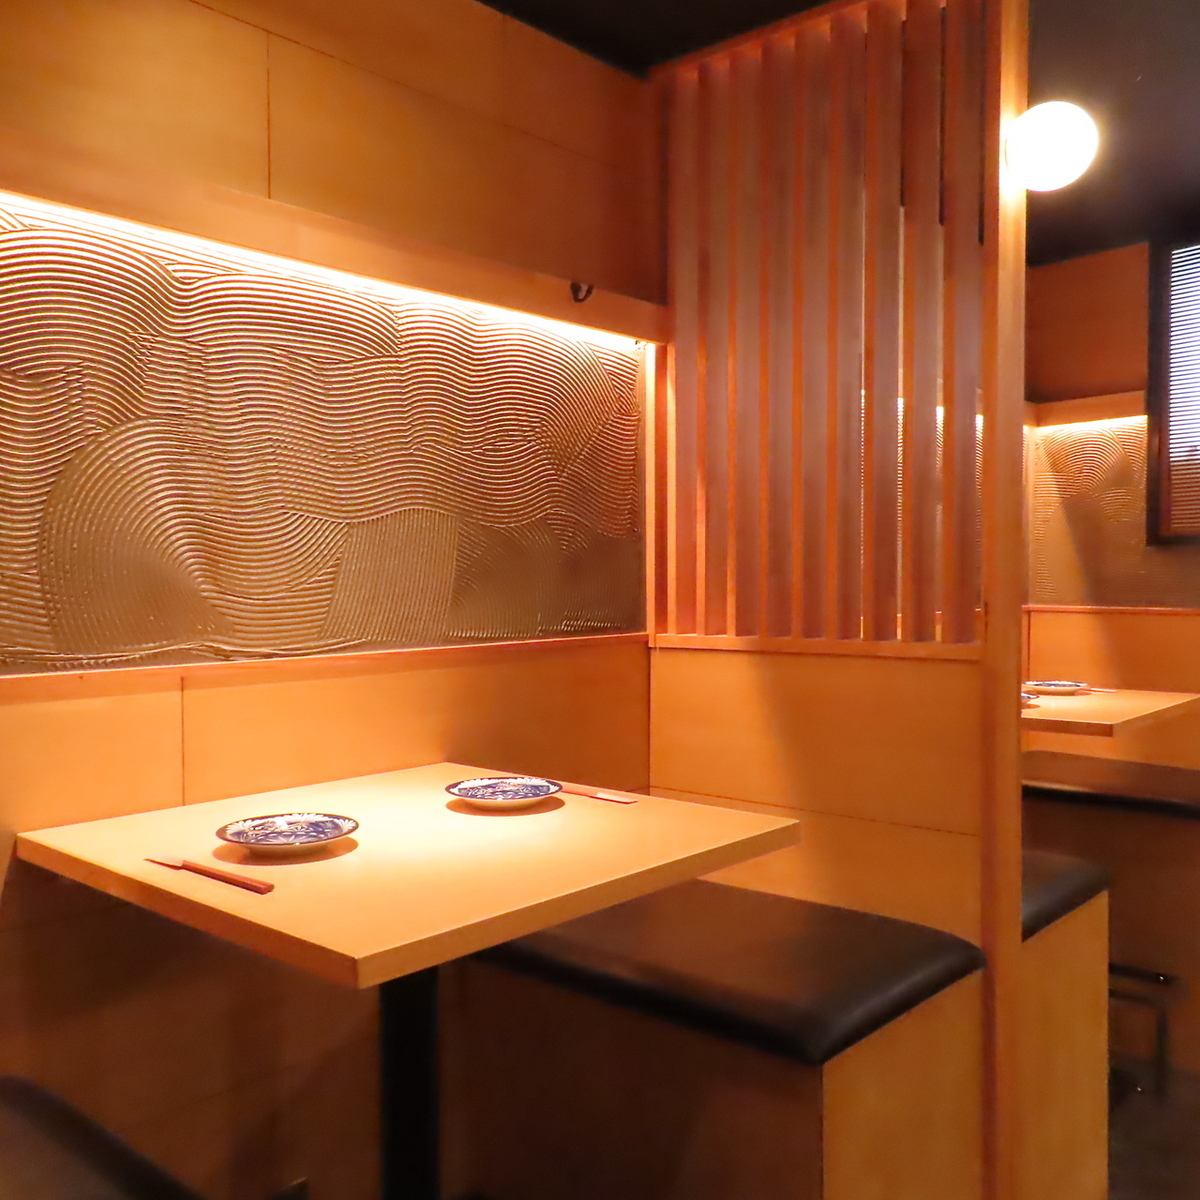 A Japanese-style interior where you can feel the warmth of wood.Please share with your loved ones.